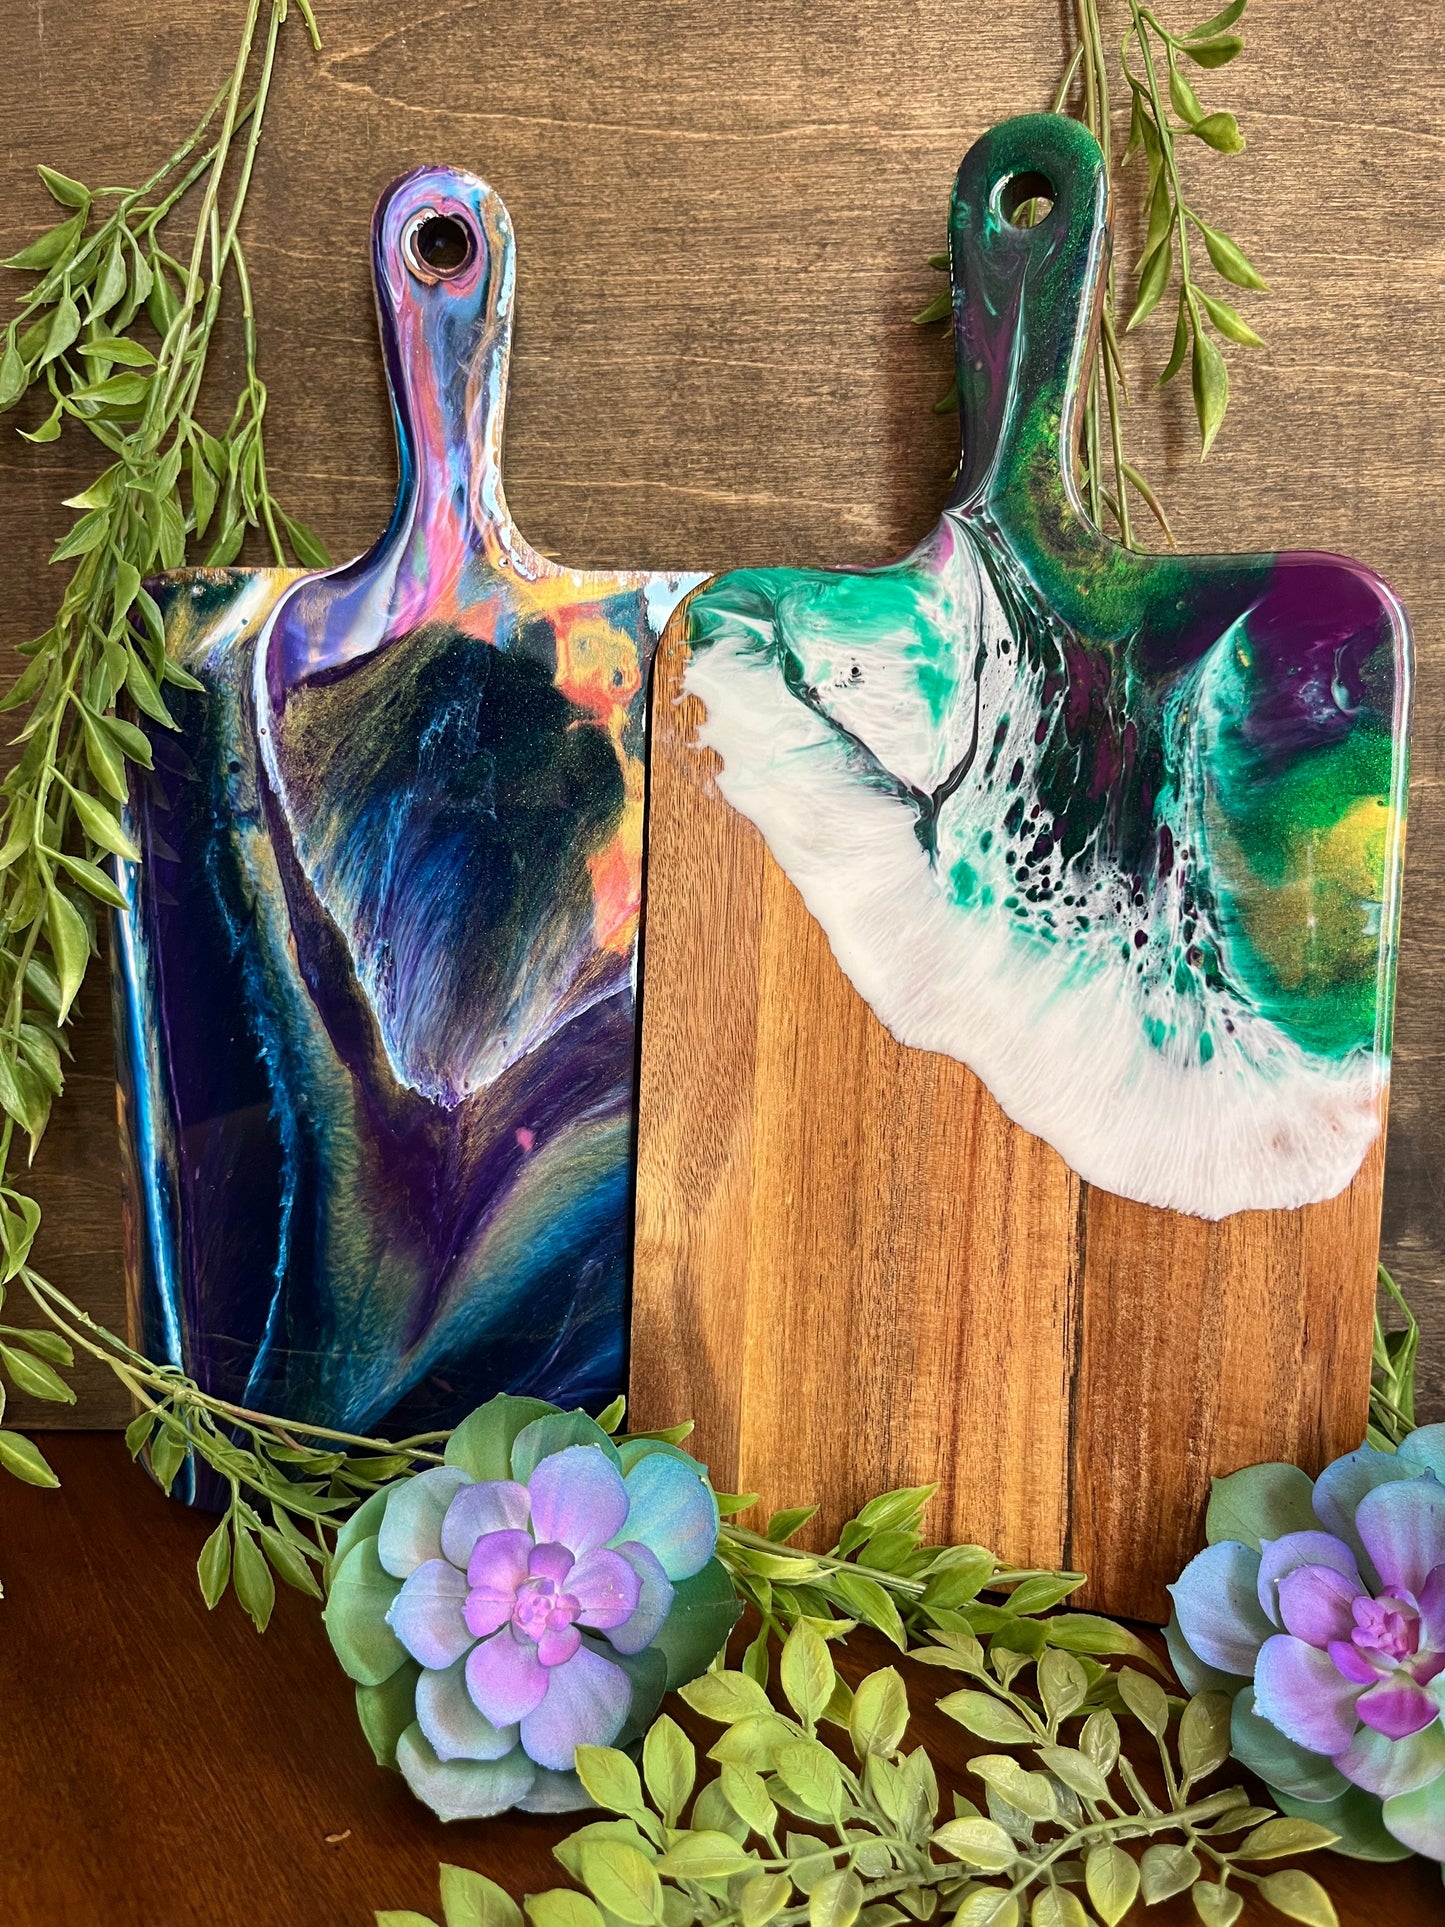 Resin Class - Personal size Cutting board - 3/09 @ 1pm